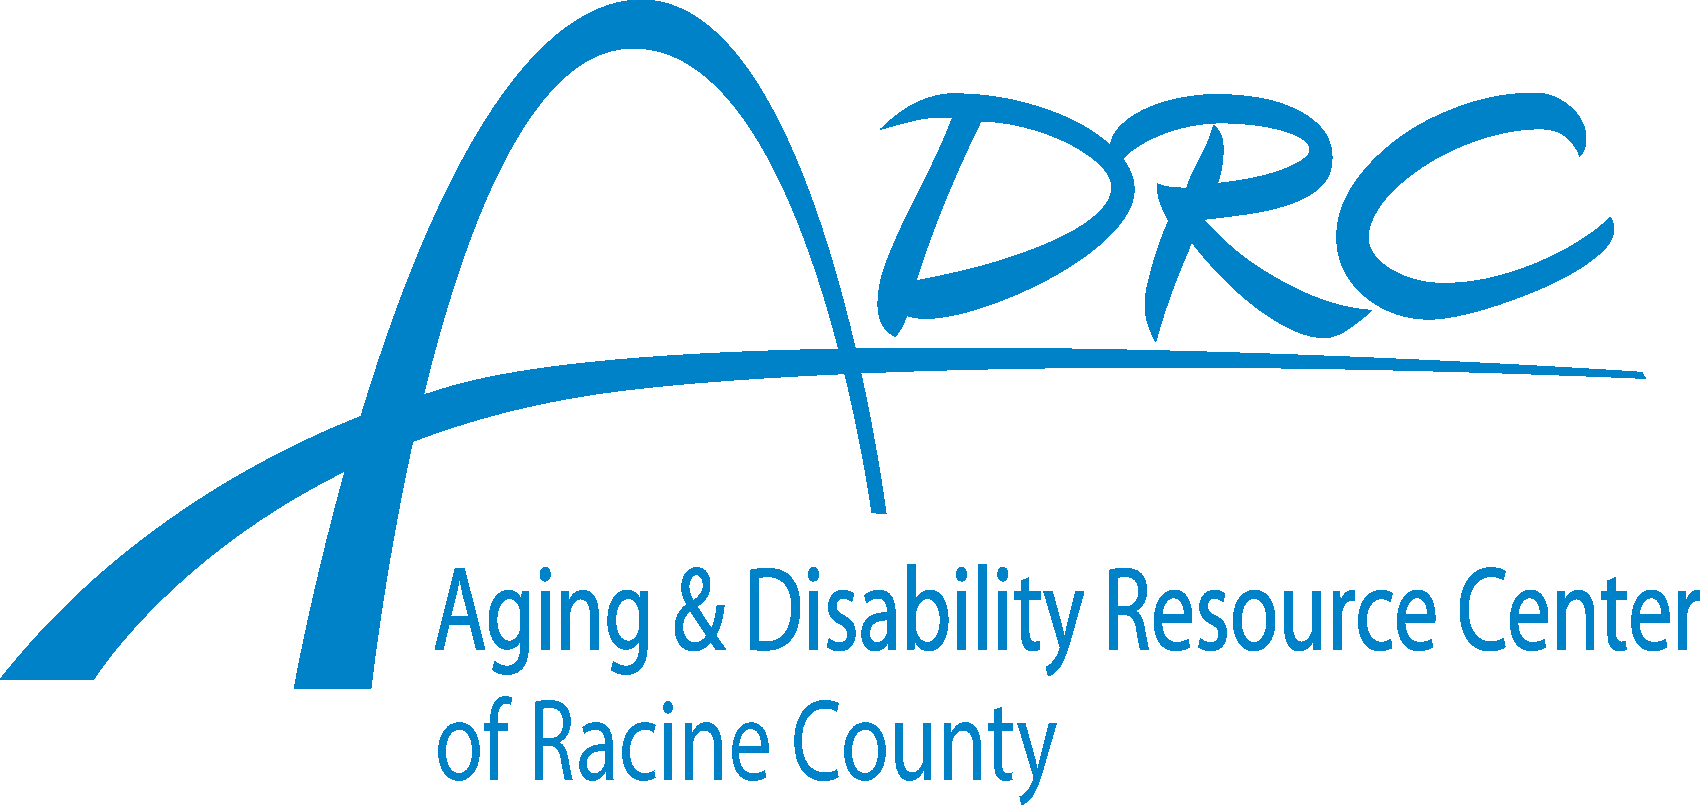 Aging and Disability Resource Center of Racine County